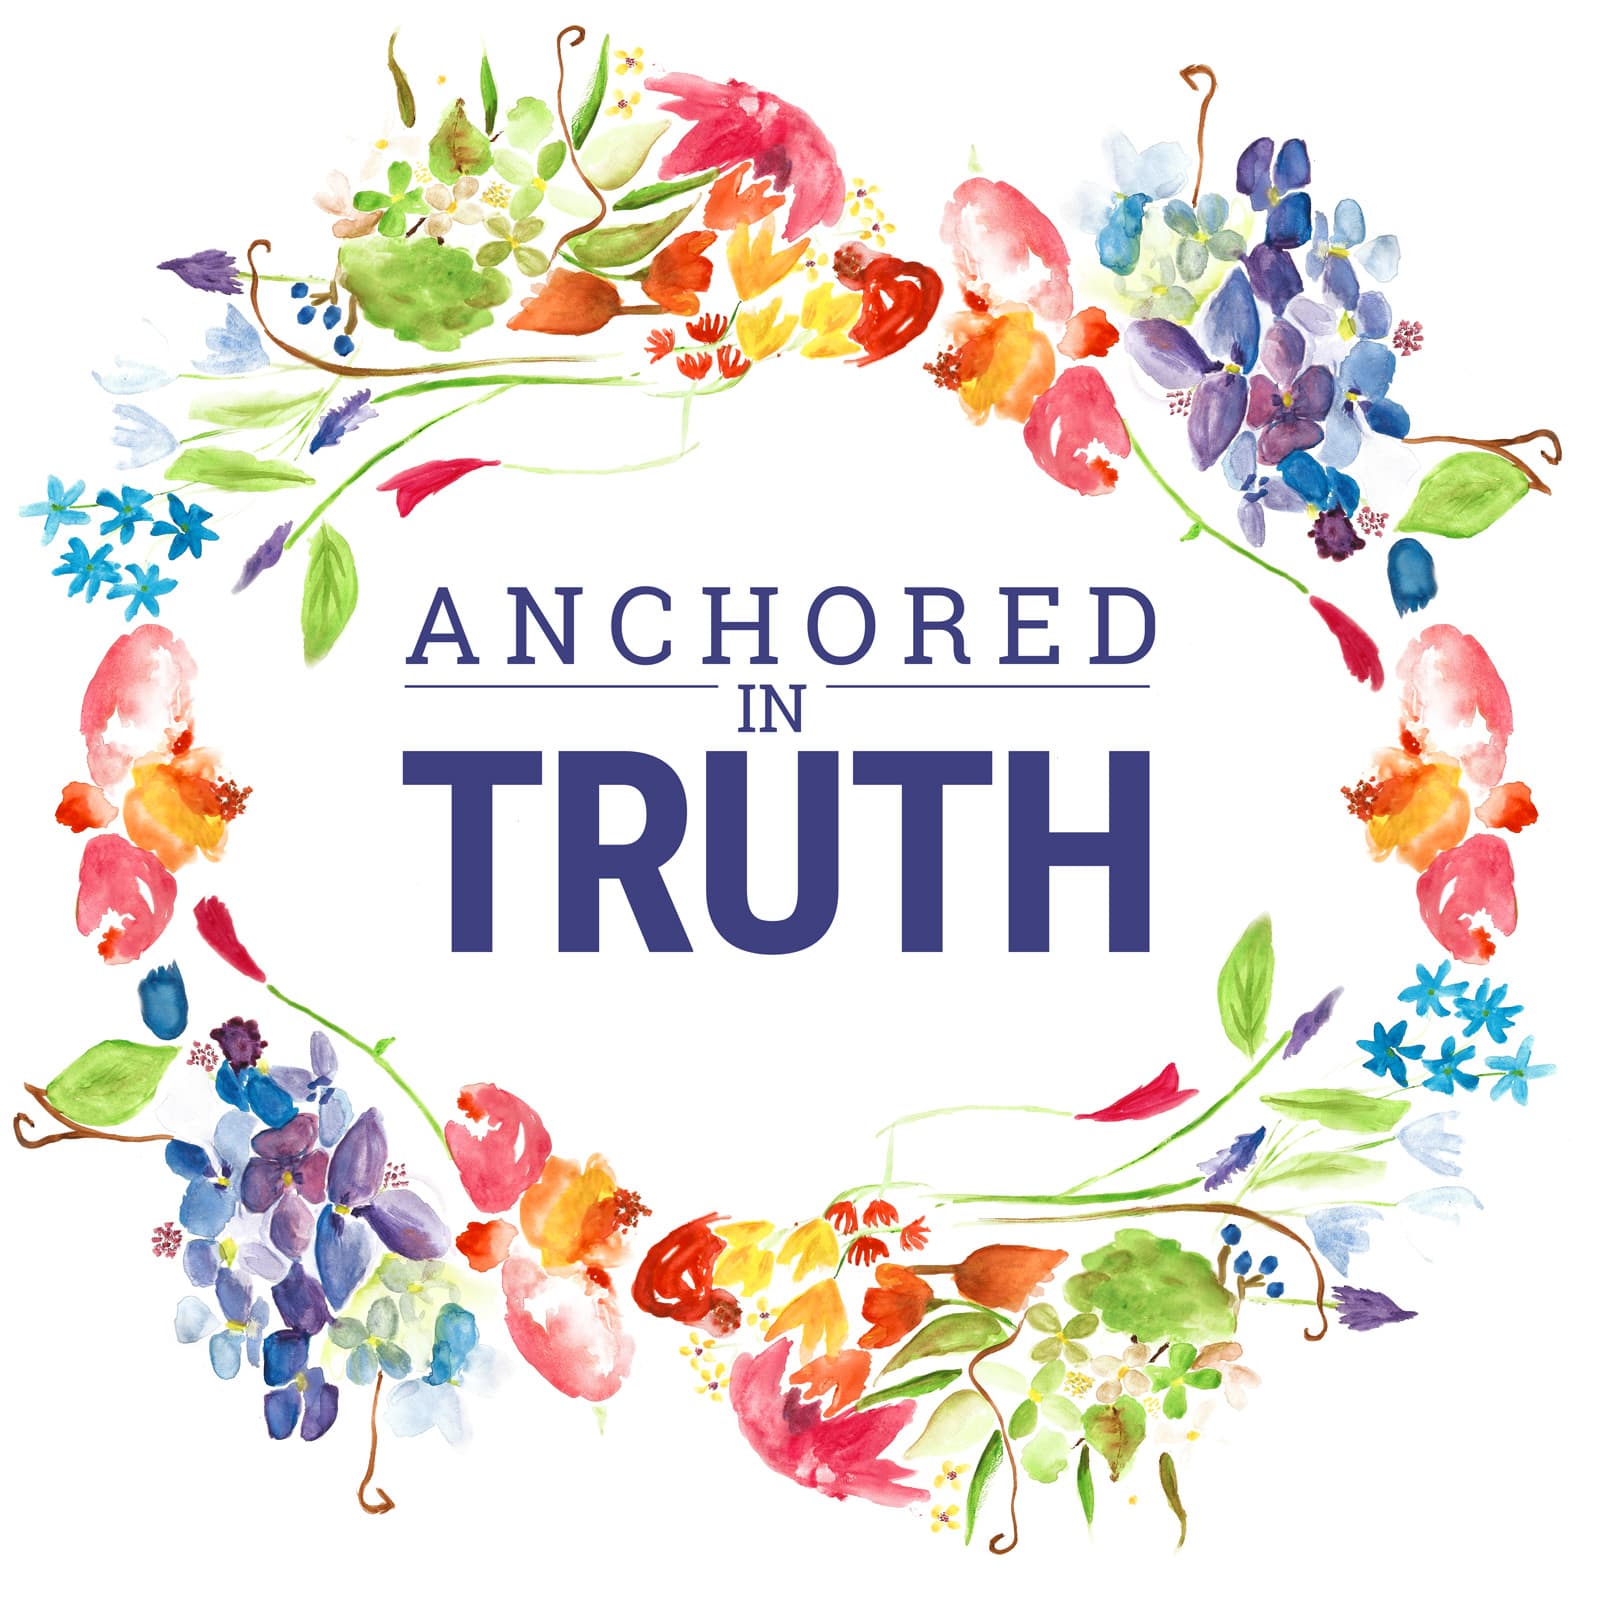 Anchored in Truth